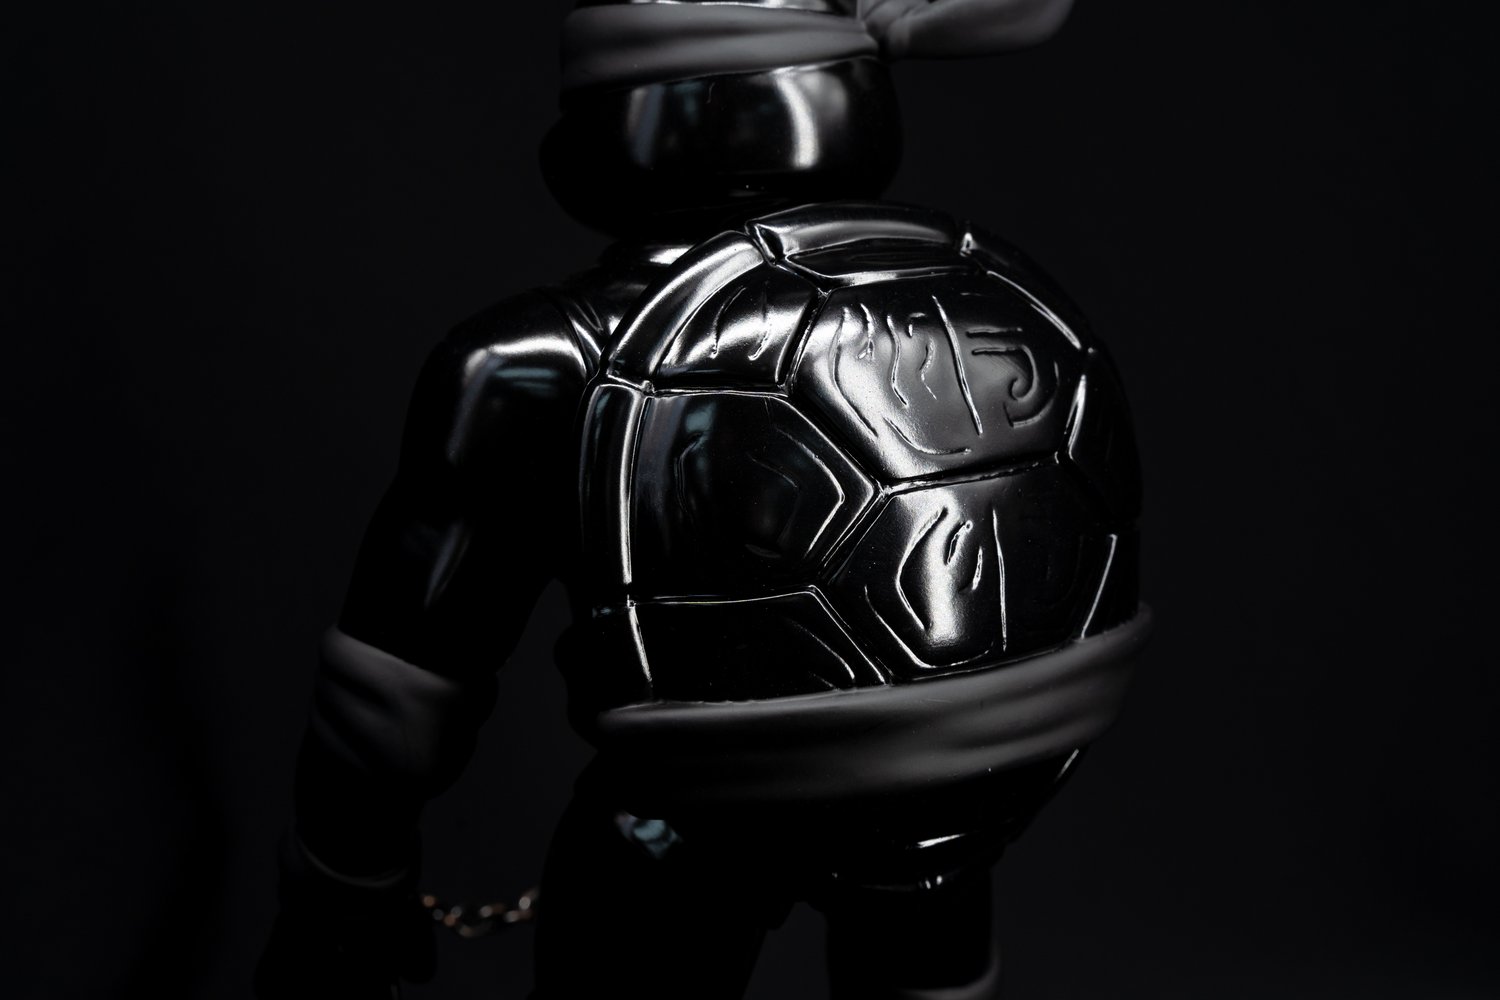 Image of MIKEY (UNBOX IN BLACK EDITION)